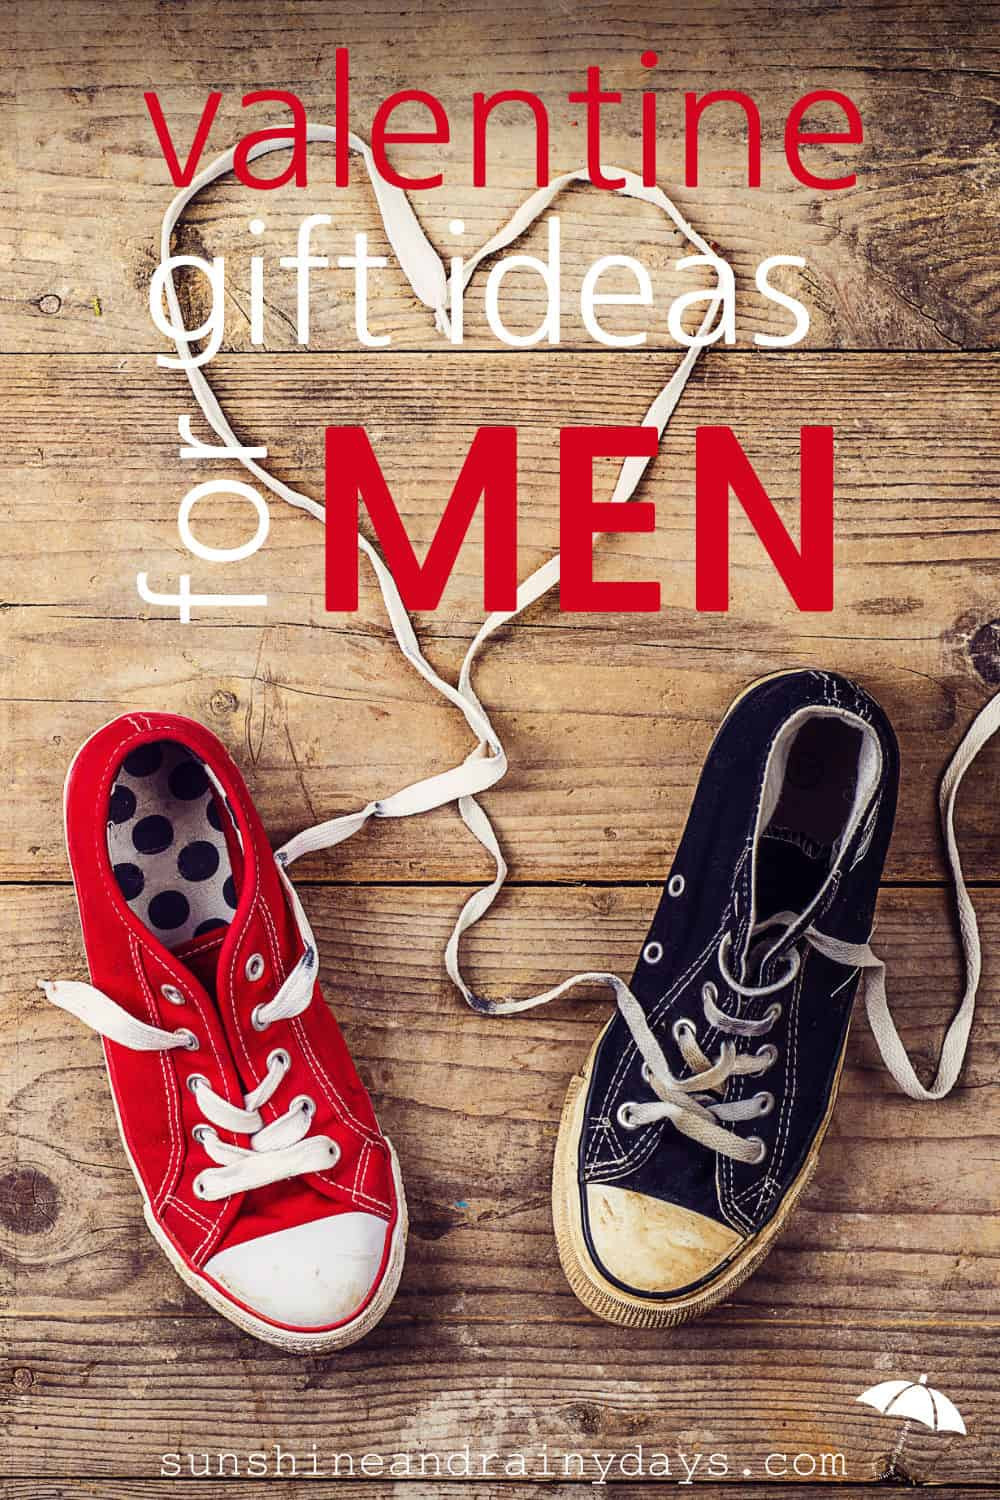 Guy Gift Ideas For Valentines Day
 Valentine Gift Ideas For Men Sunshine and Rainy Days